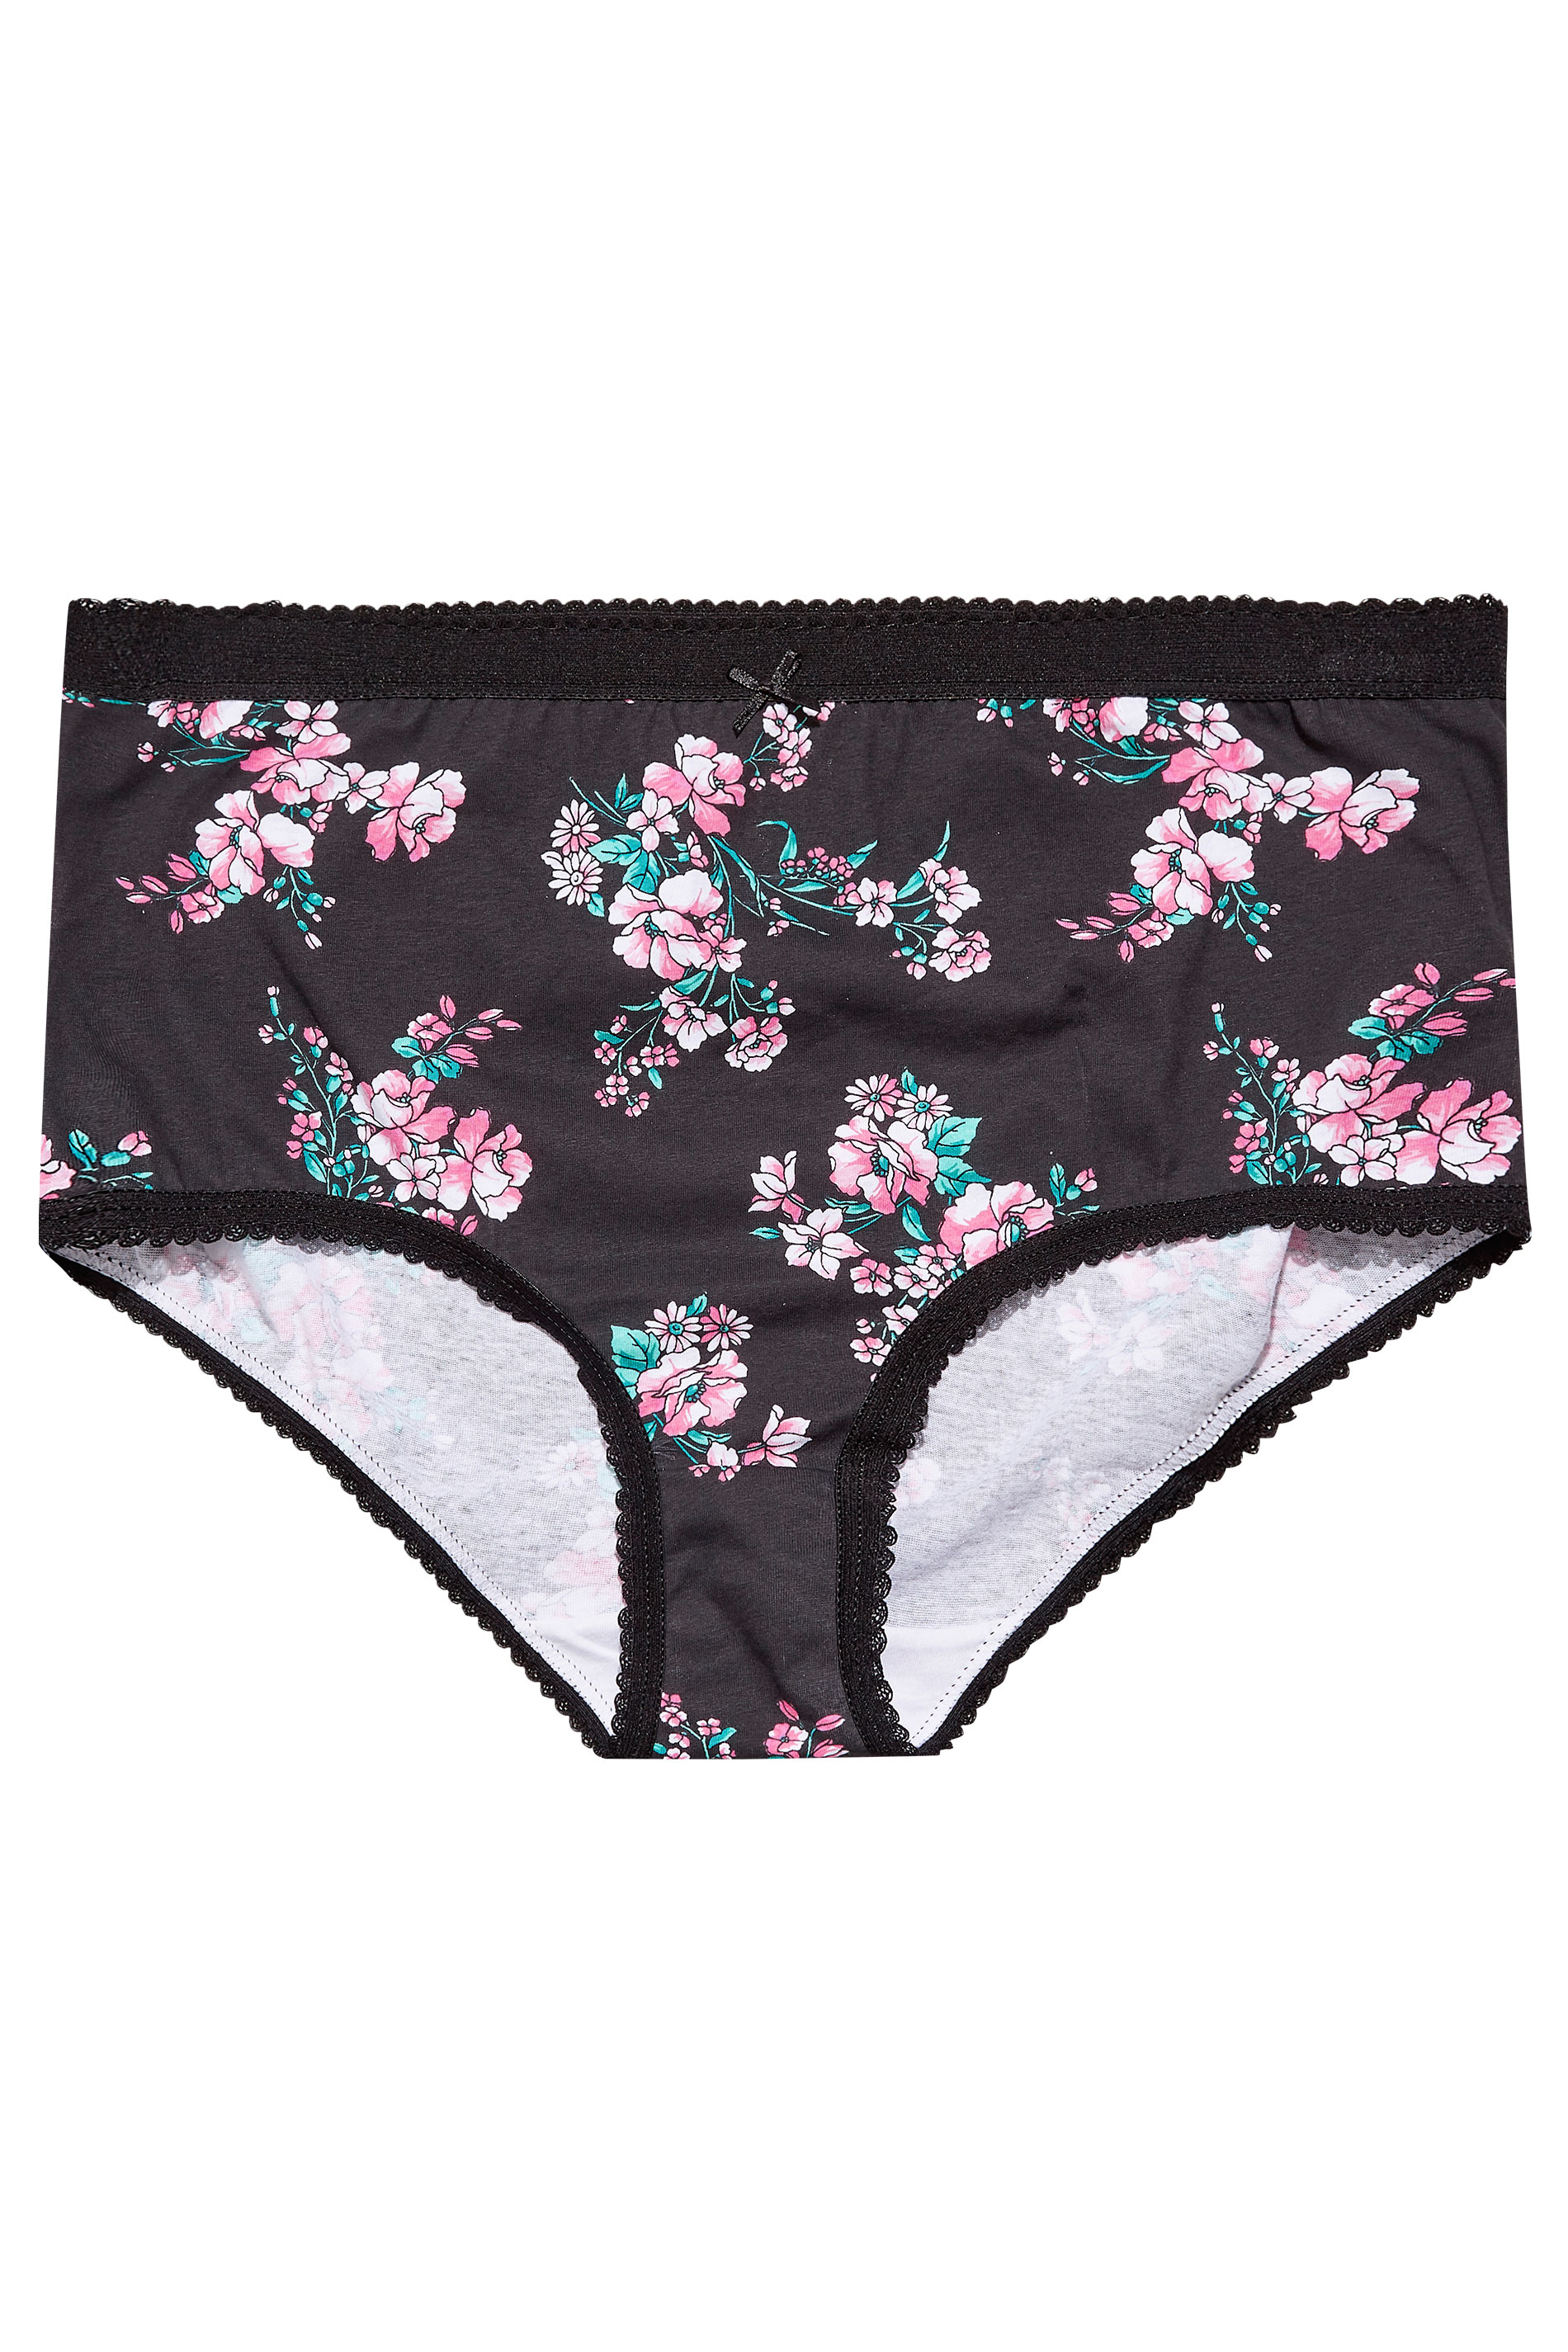 5 PACK Plus Size Black Floral High Waisted Full Briefs | Yours Clothing 3